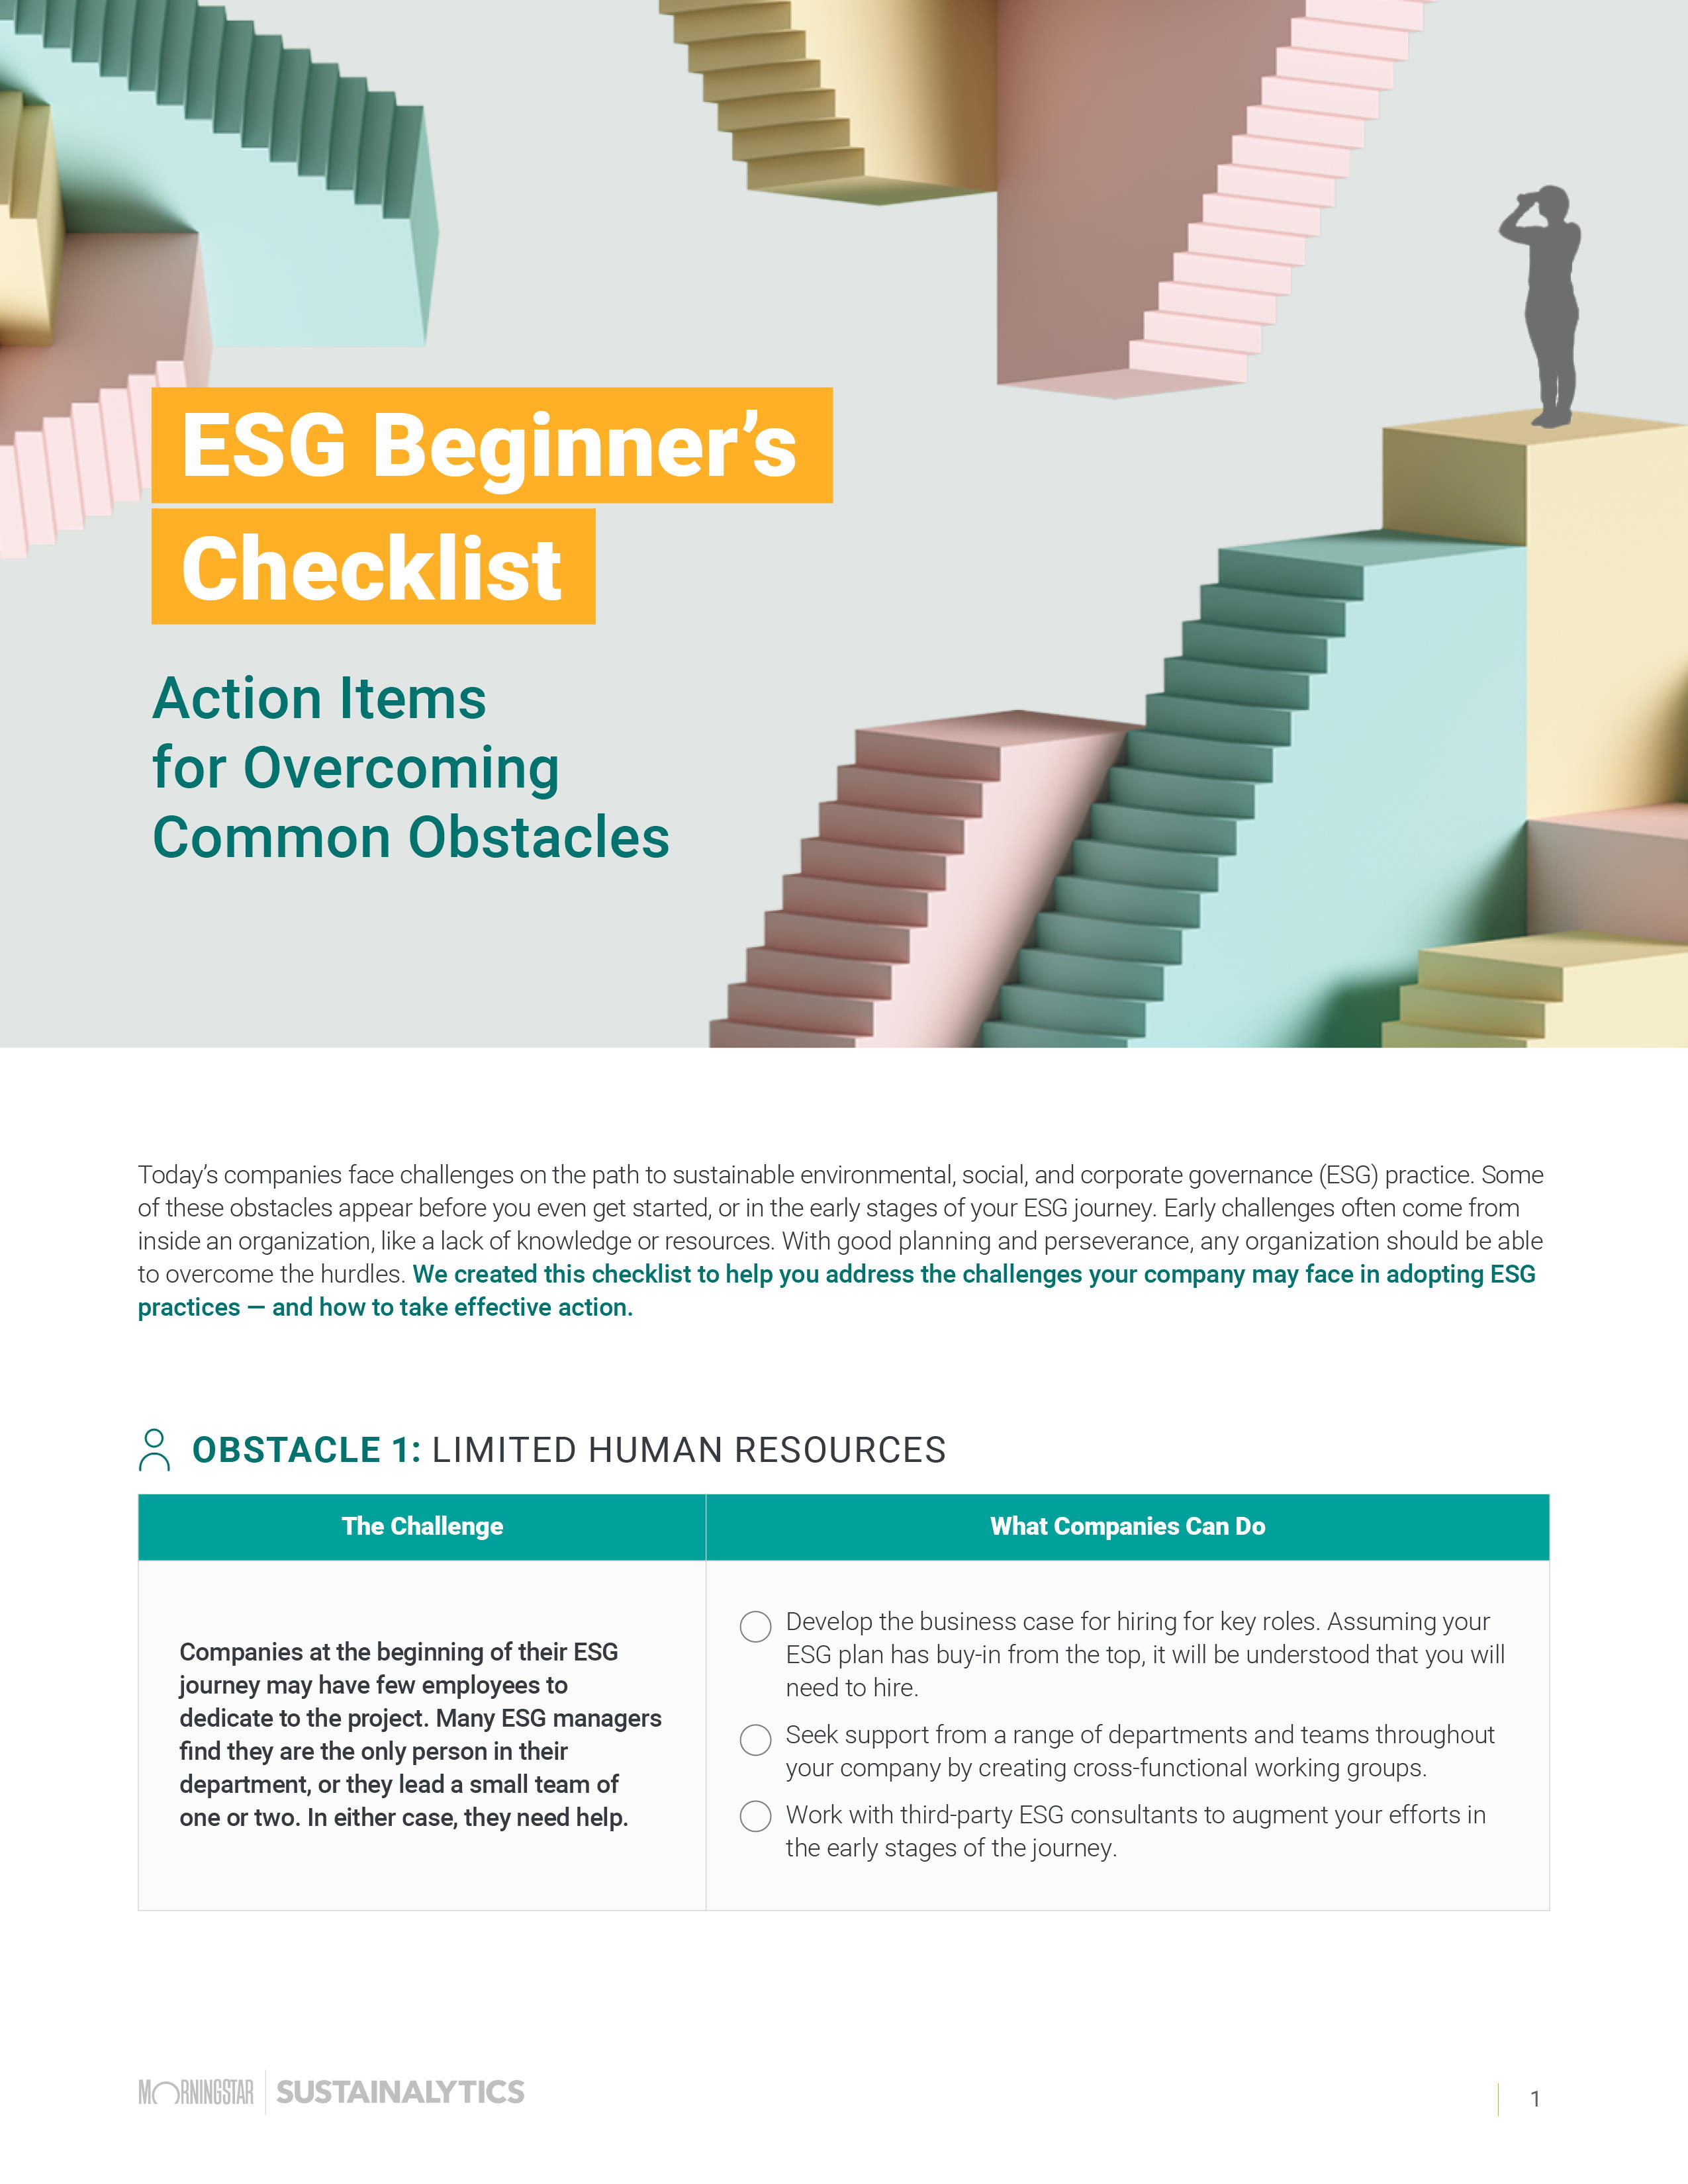 Download our ESG Beginner's Checklist to learn action items on overcoming common obstacles